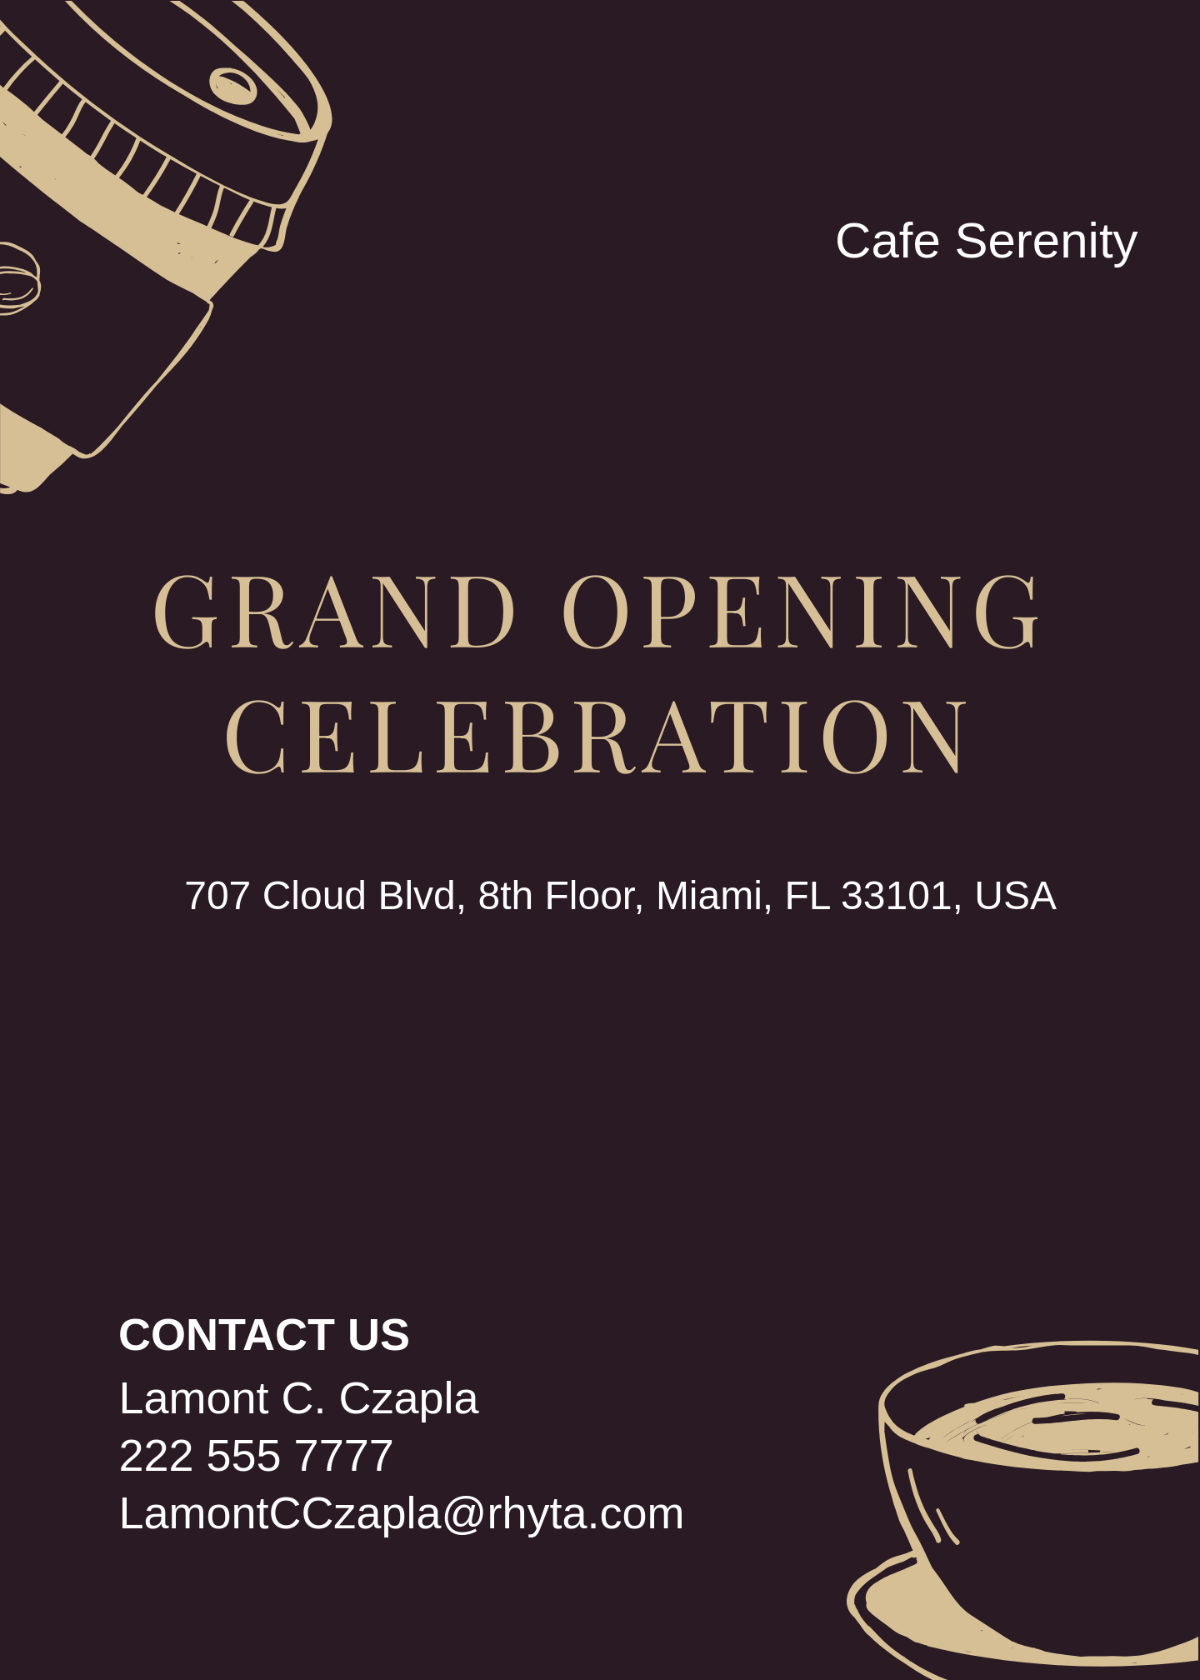 Grand Cafe Opening Invitation